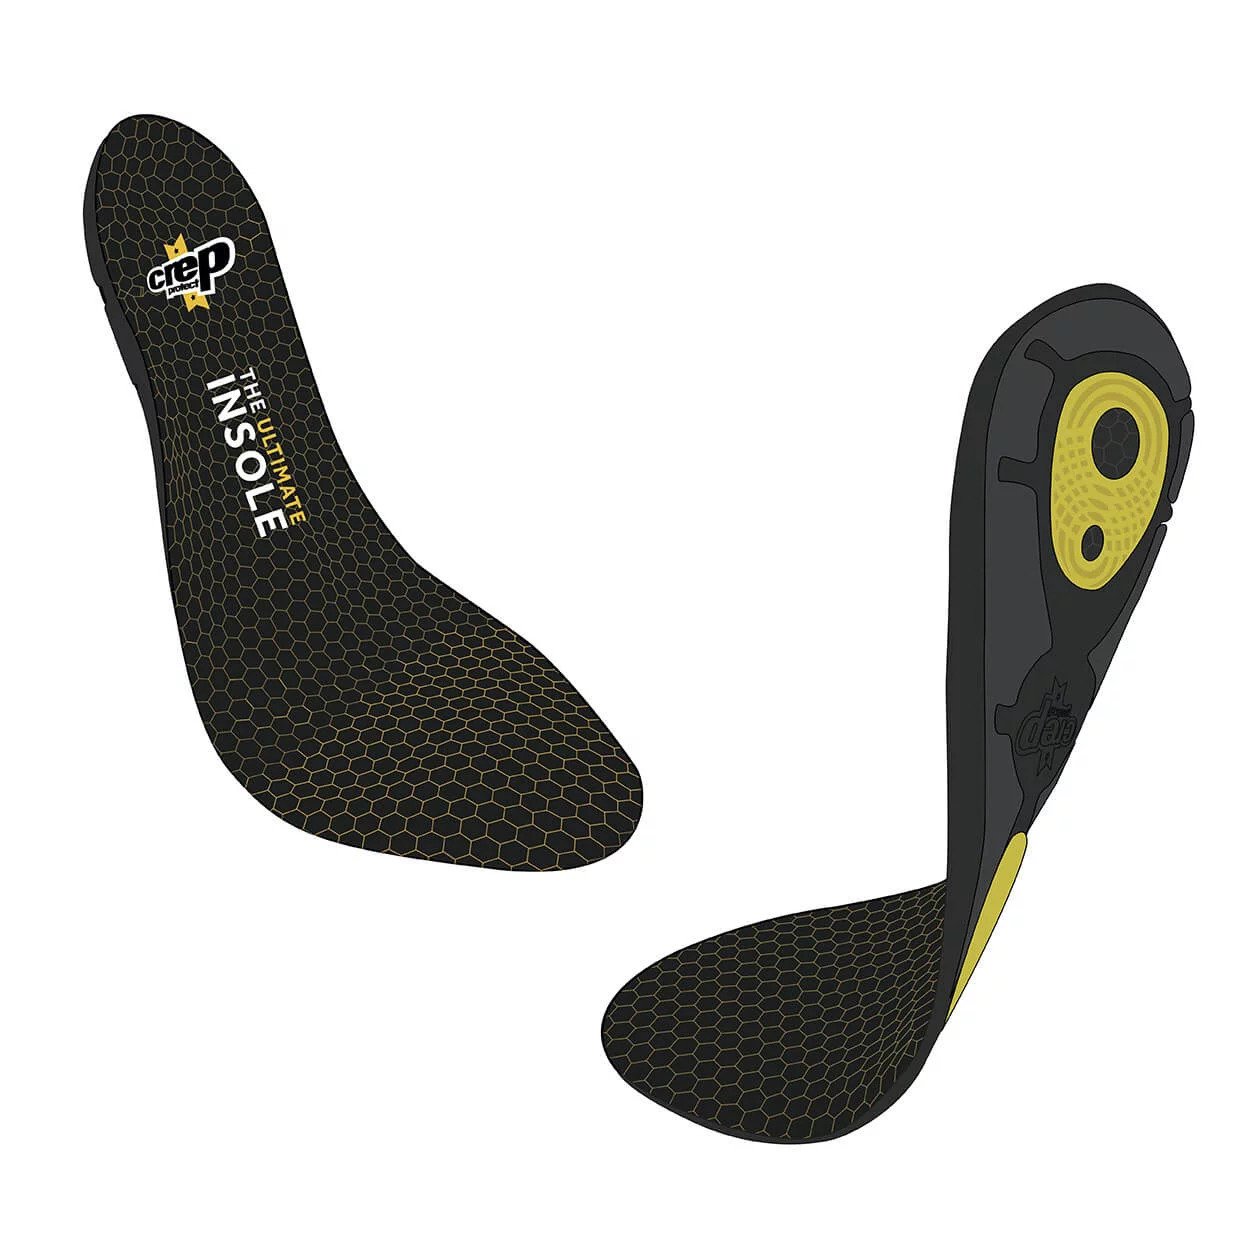 crepprotect gel insoles